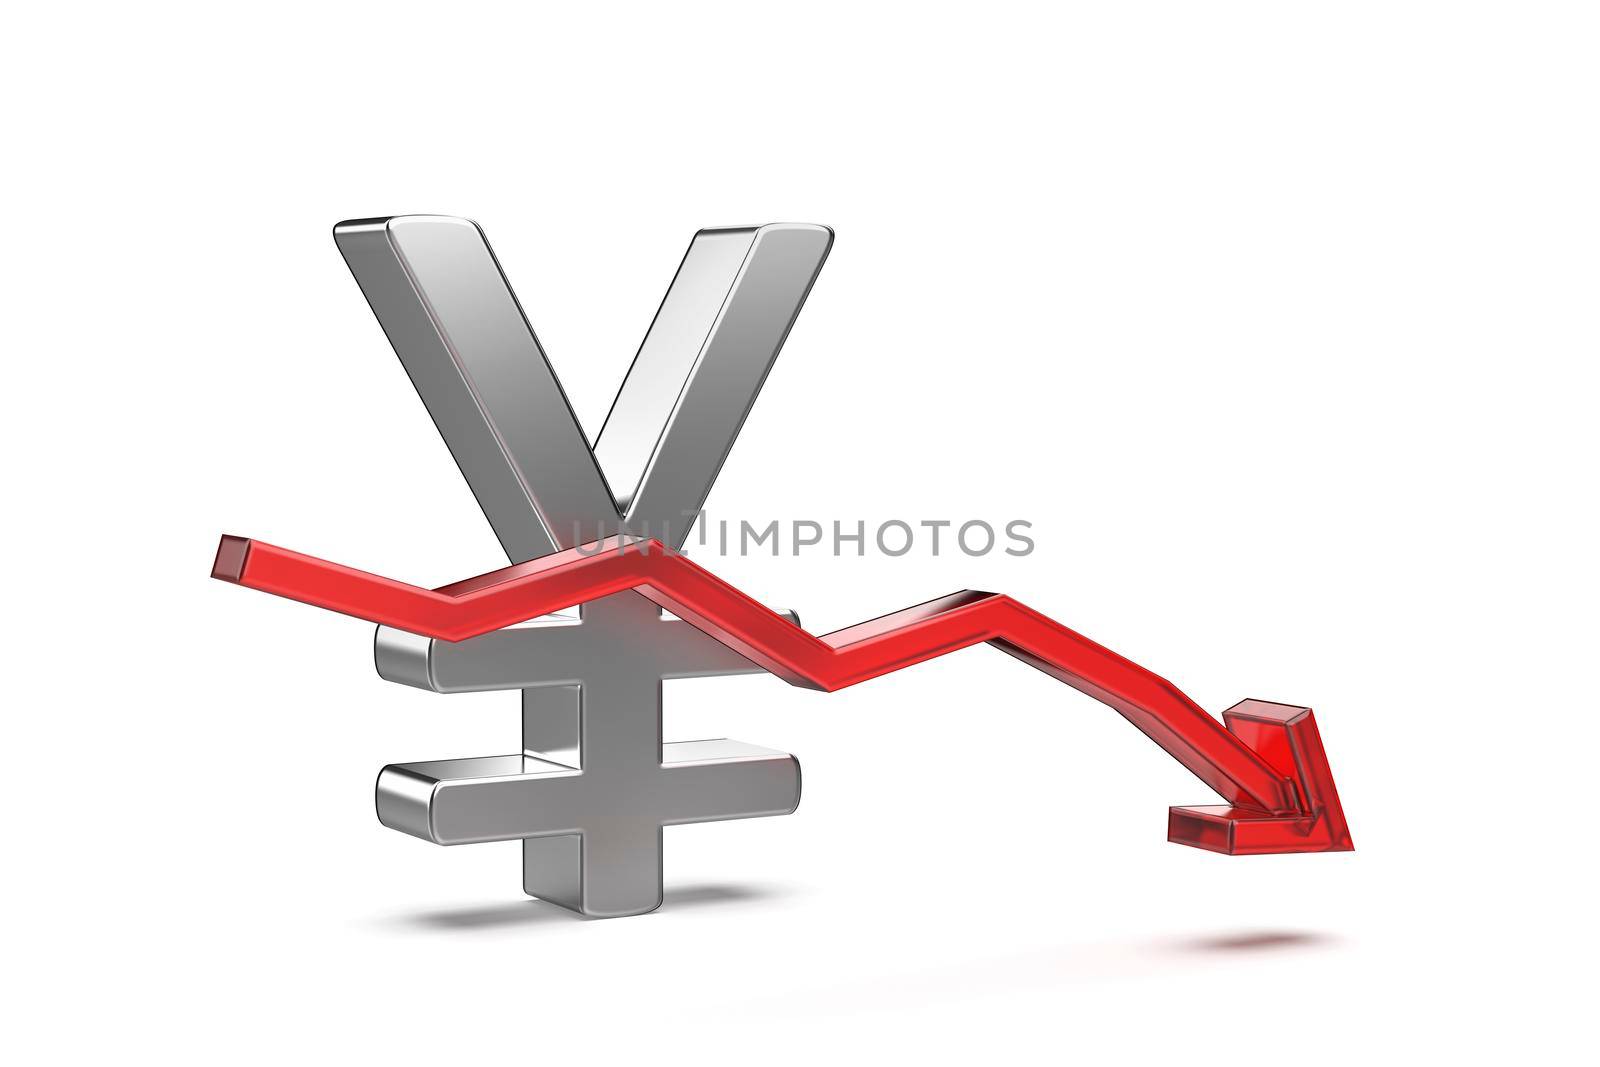 Japanese Yen or Chinese Yuan symbol with red arrow pointing down
 by magraphics